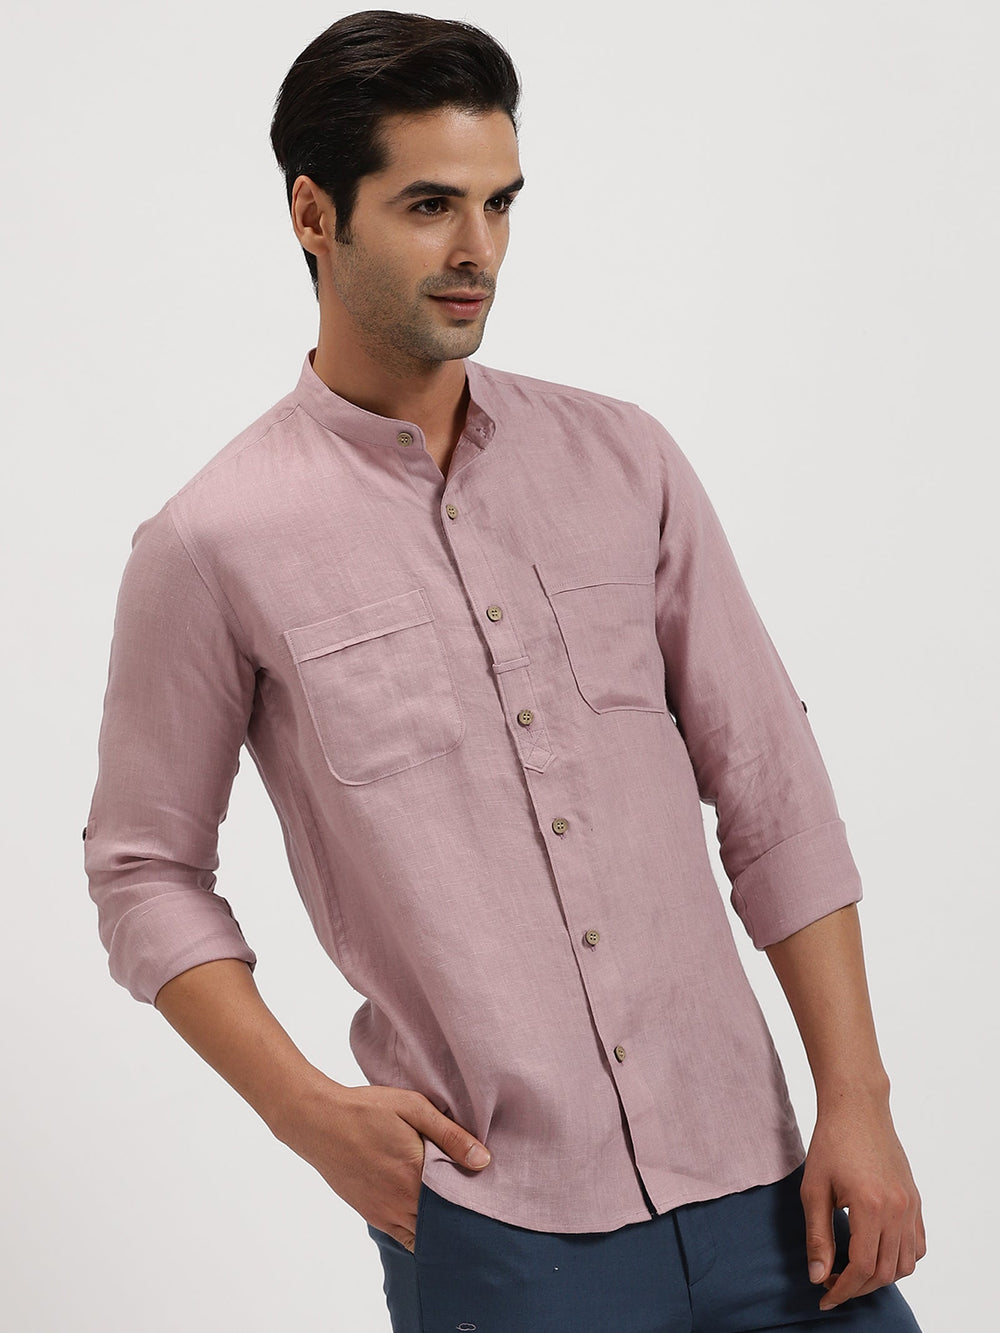 Luca - Pure Linen Double Pocket Full Sleeve Shirt - Lilac | Rescue